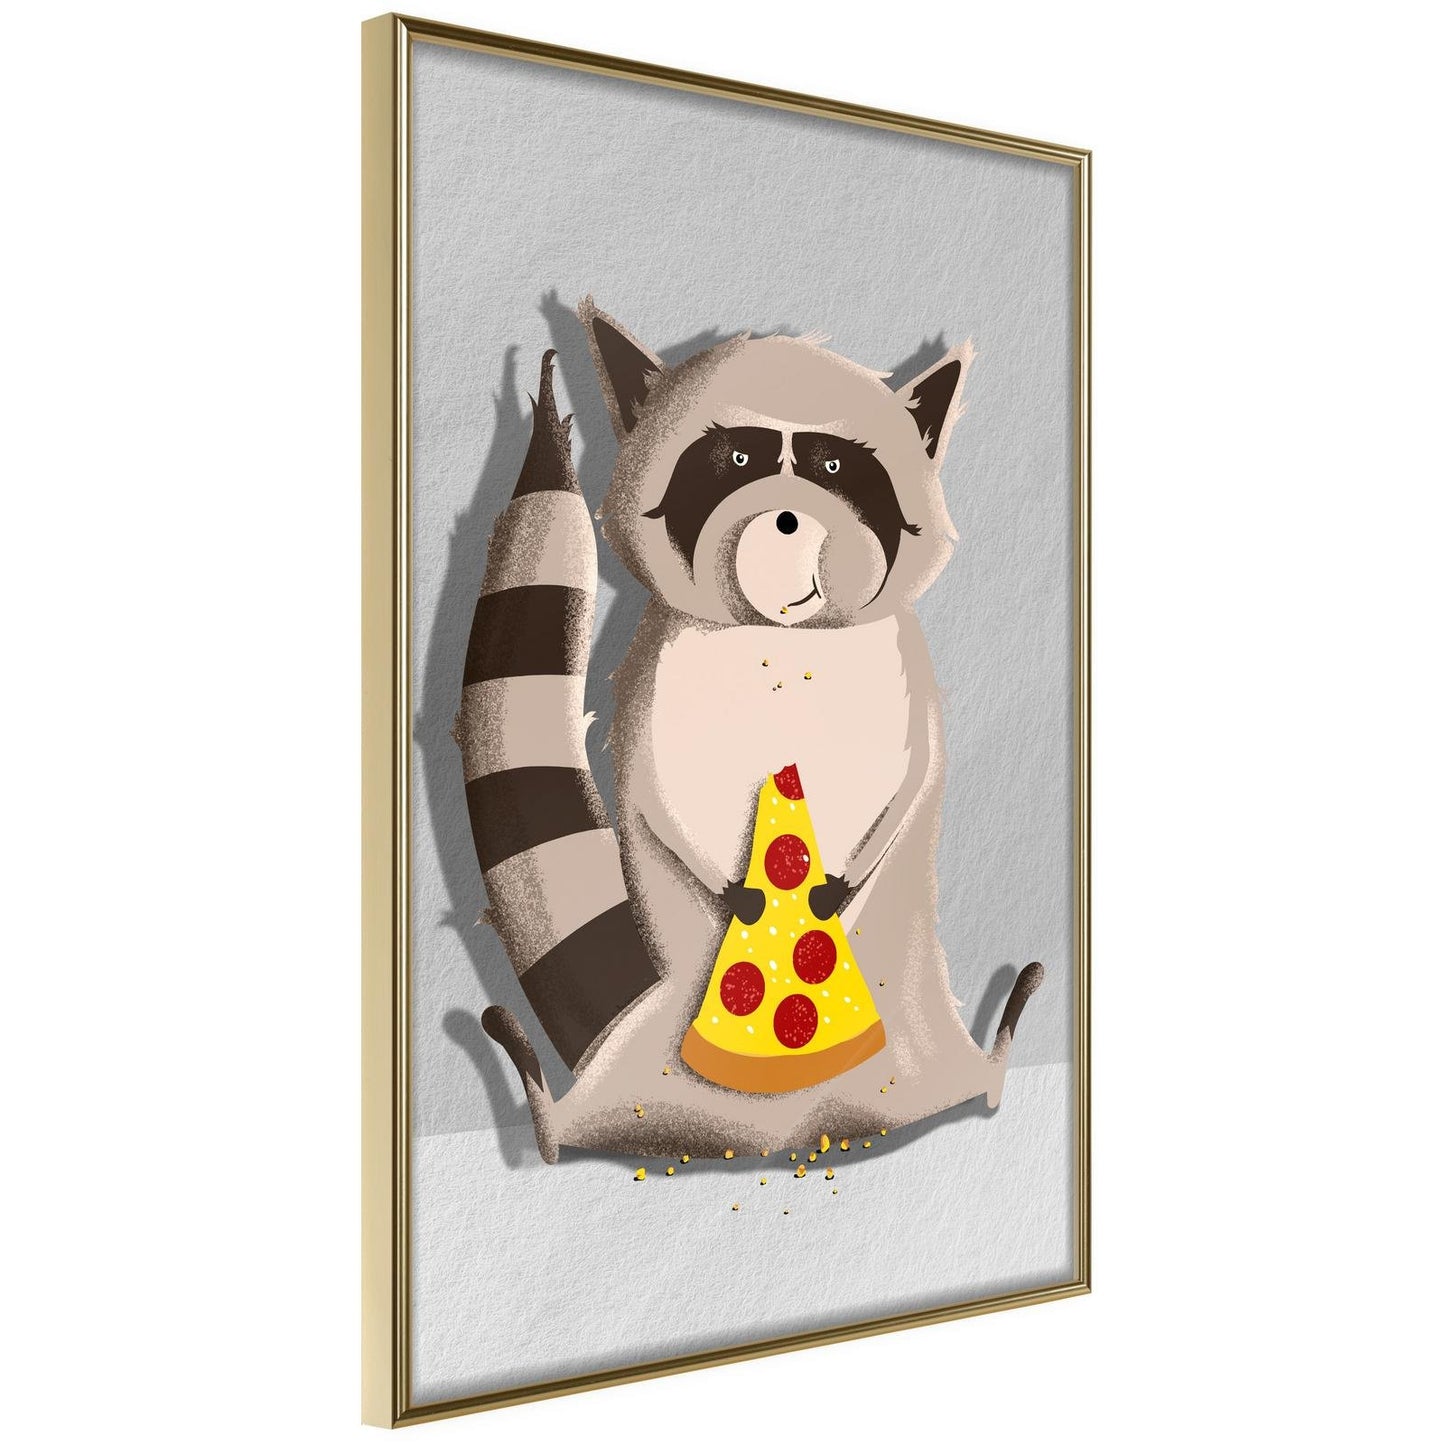 Racoon Eating Pizza